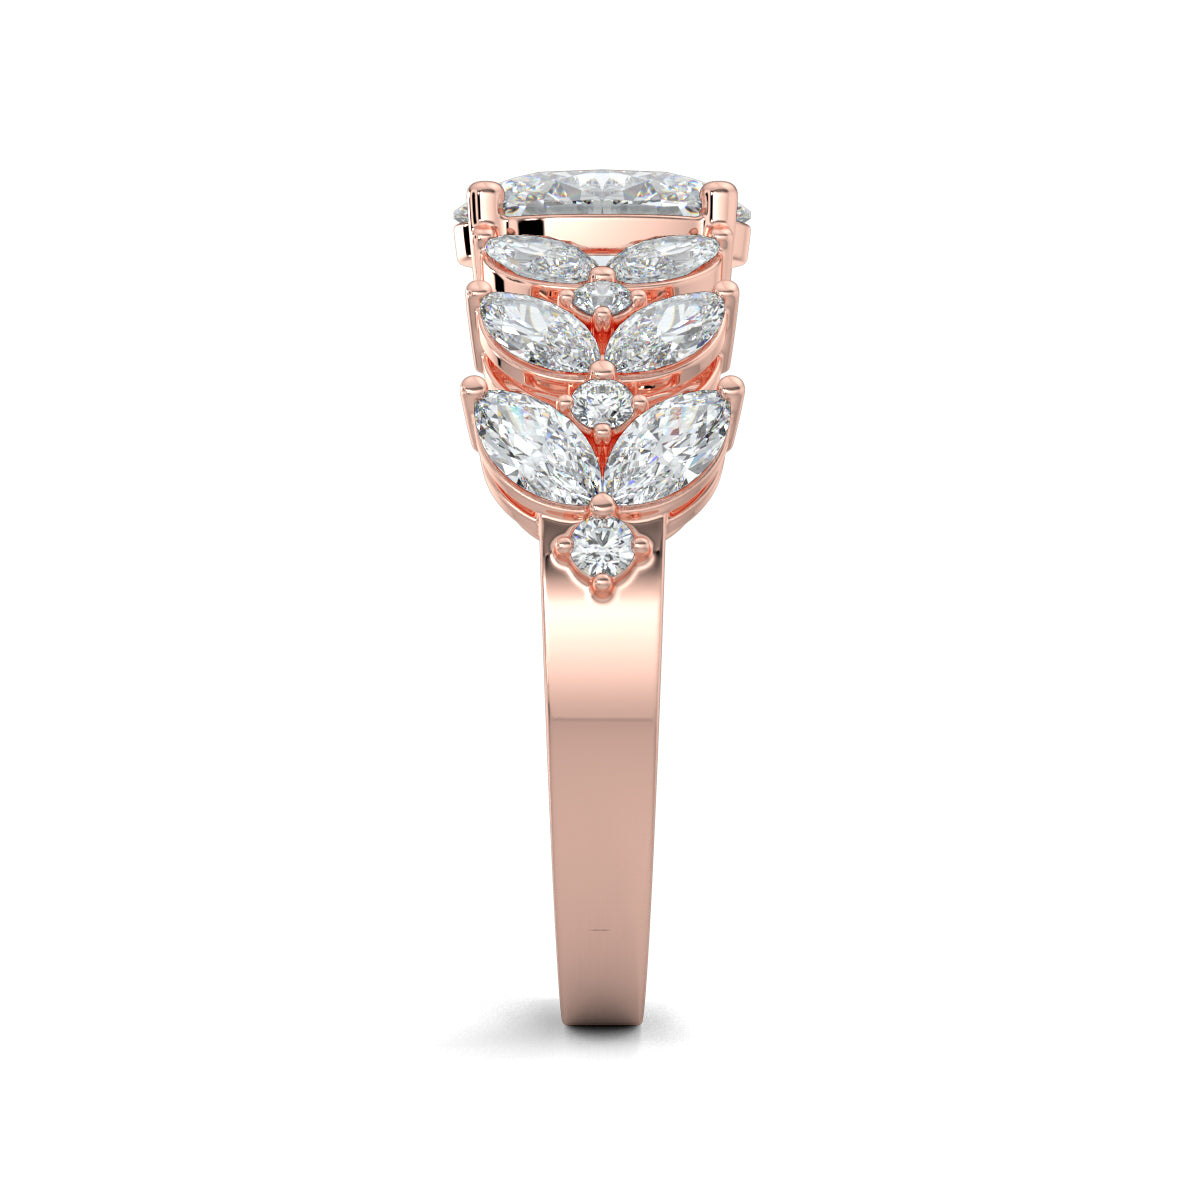 Rose Gold, Diamond Ring, Galactic Charm Solitaire Ring, Natural Diamonds, Lab-Grown Diamonds, Celestial Jewelry, Oval Cut Diamond, Marquise Cut Diamonds, Classic Band Ring